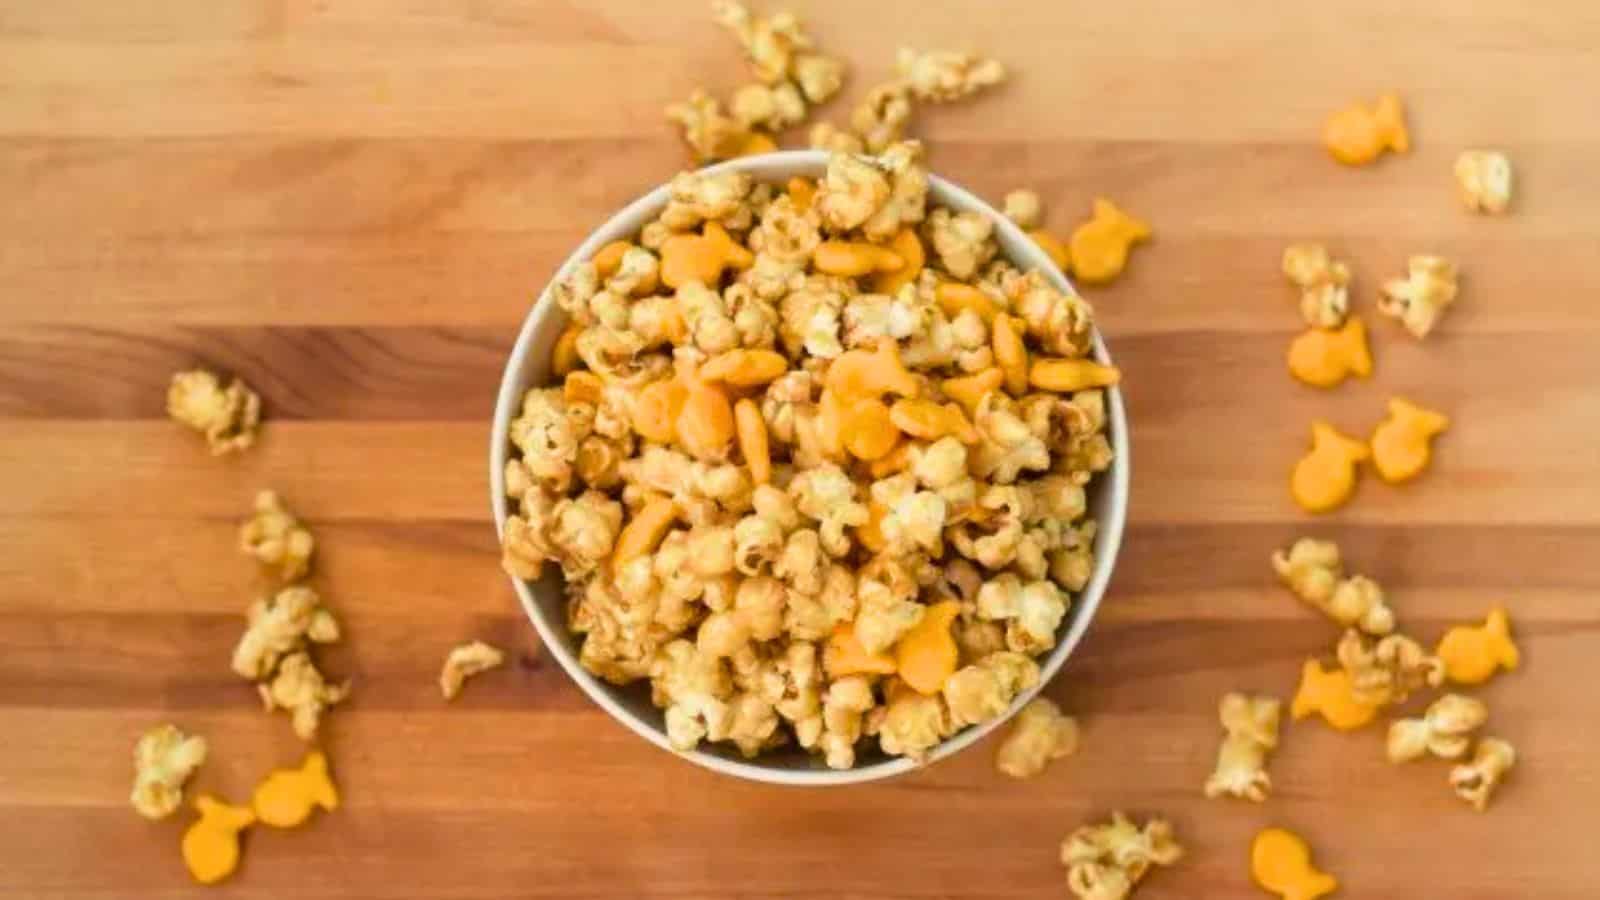 Image shows an overhead shot of Chicago style popcorn mix on a wooden table.